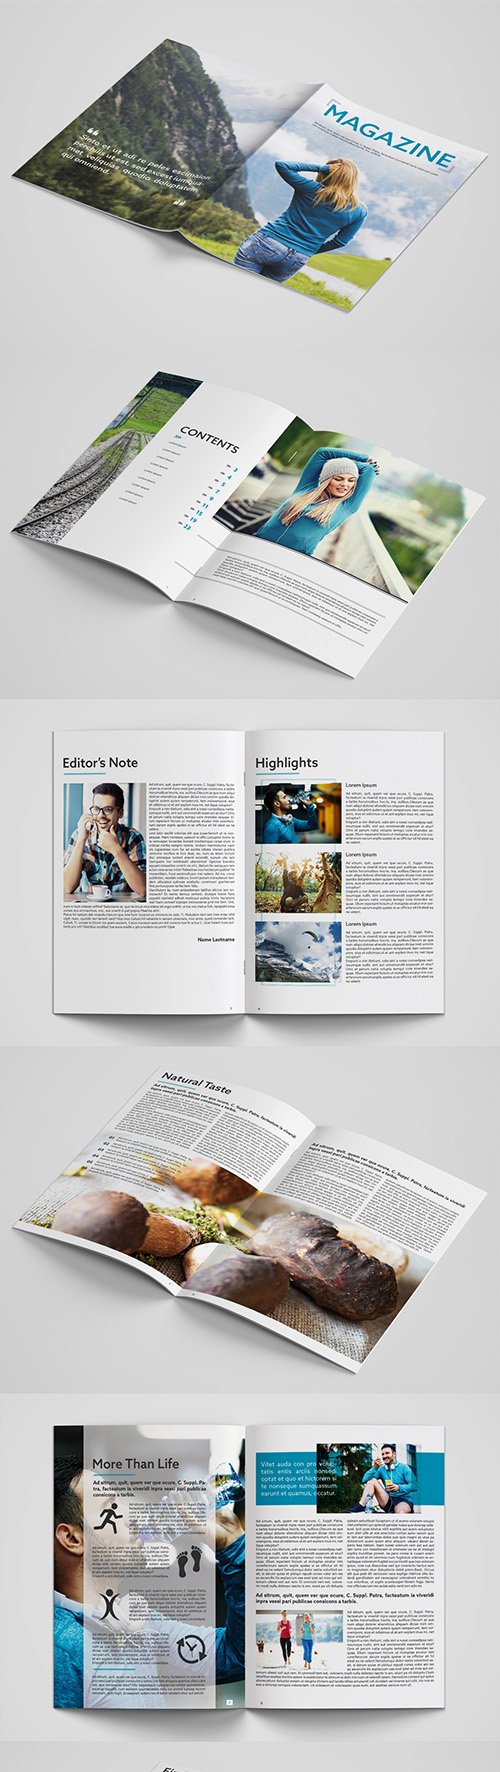 Magazine Layout with Blue Accents